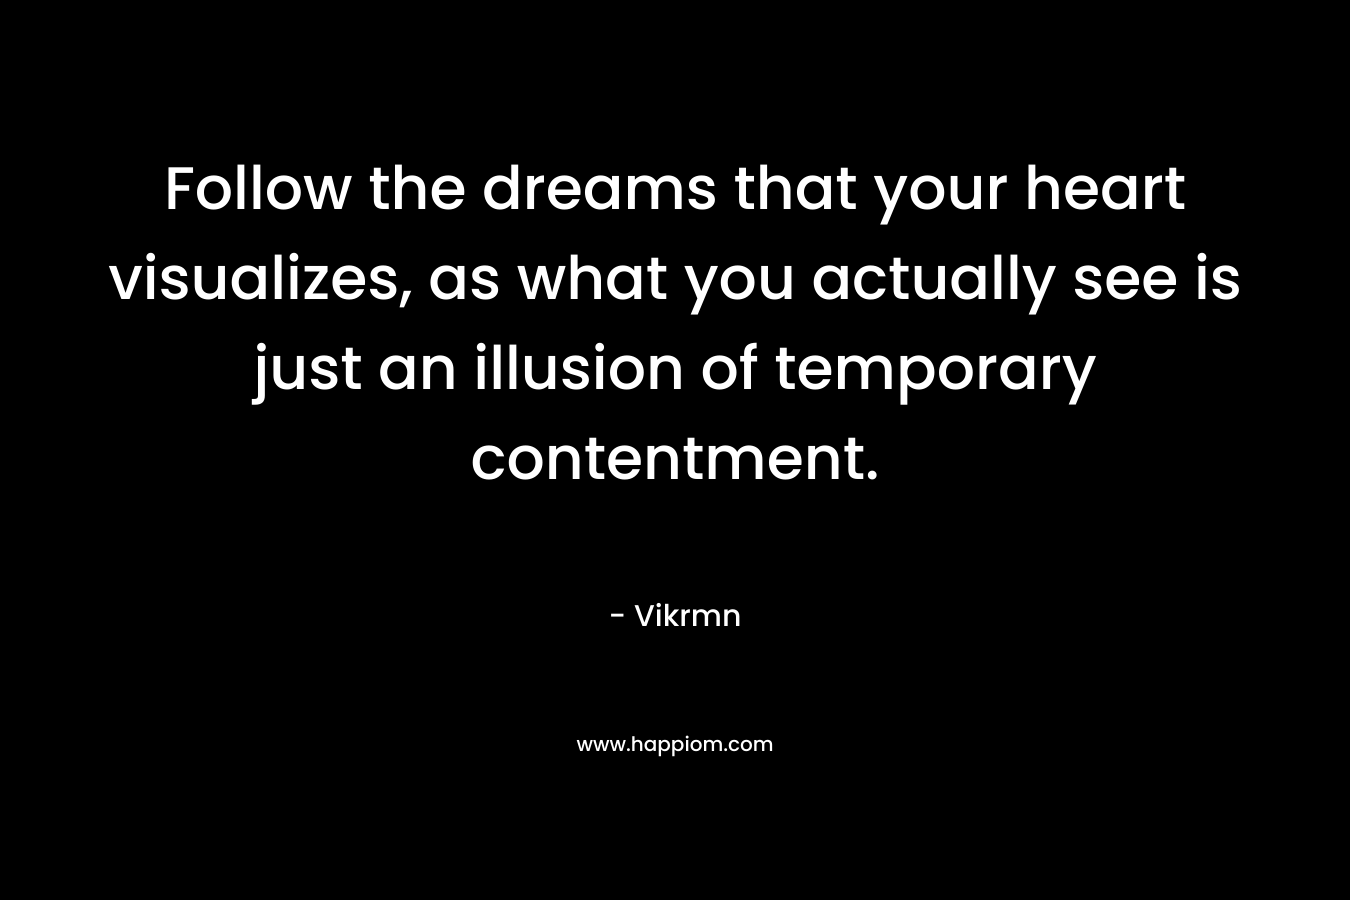 Follow the dreams that your heart visualizes, as what you actually see is just an illusion of temporary contentment. – Vikrmn